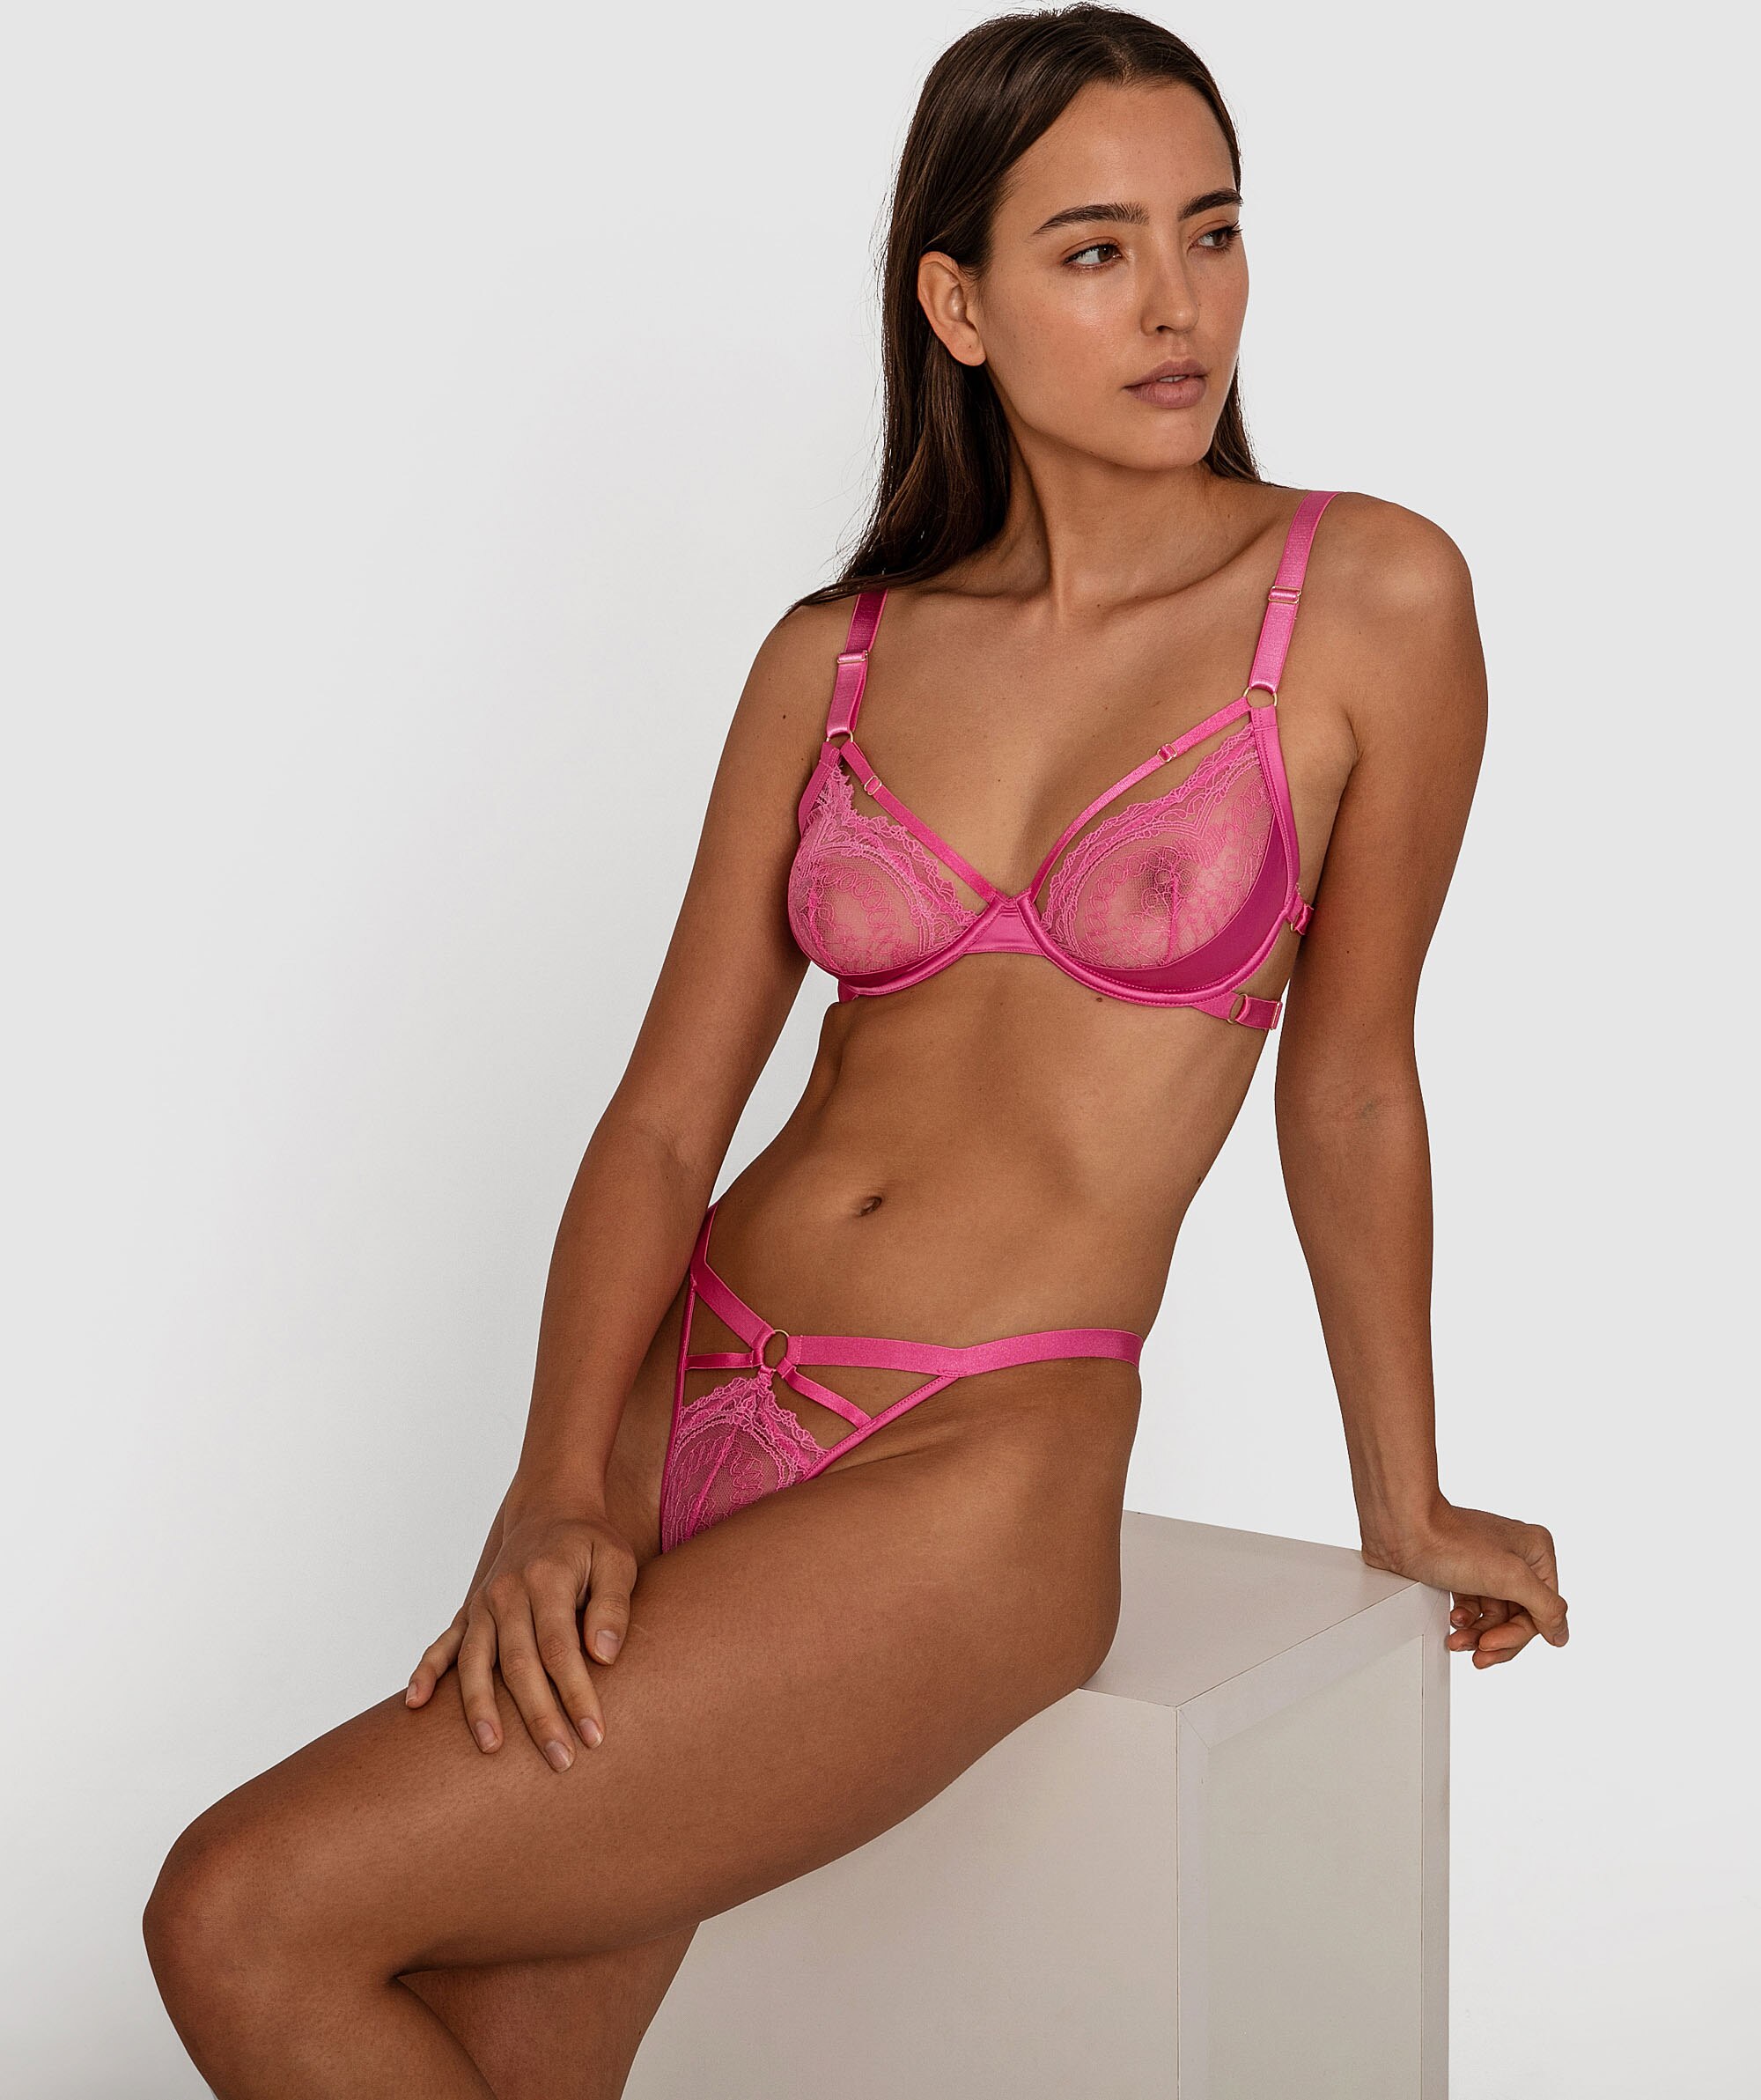 Night Games Delight Underwire Soft Cup Set - Pink